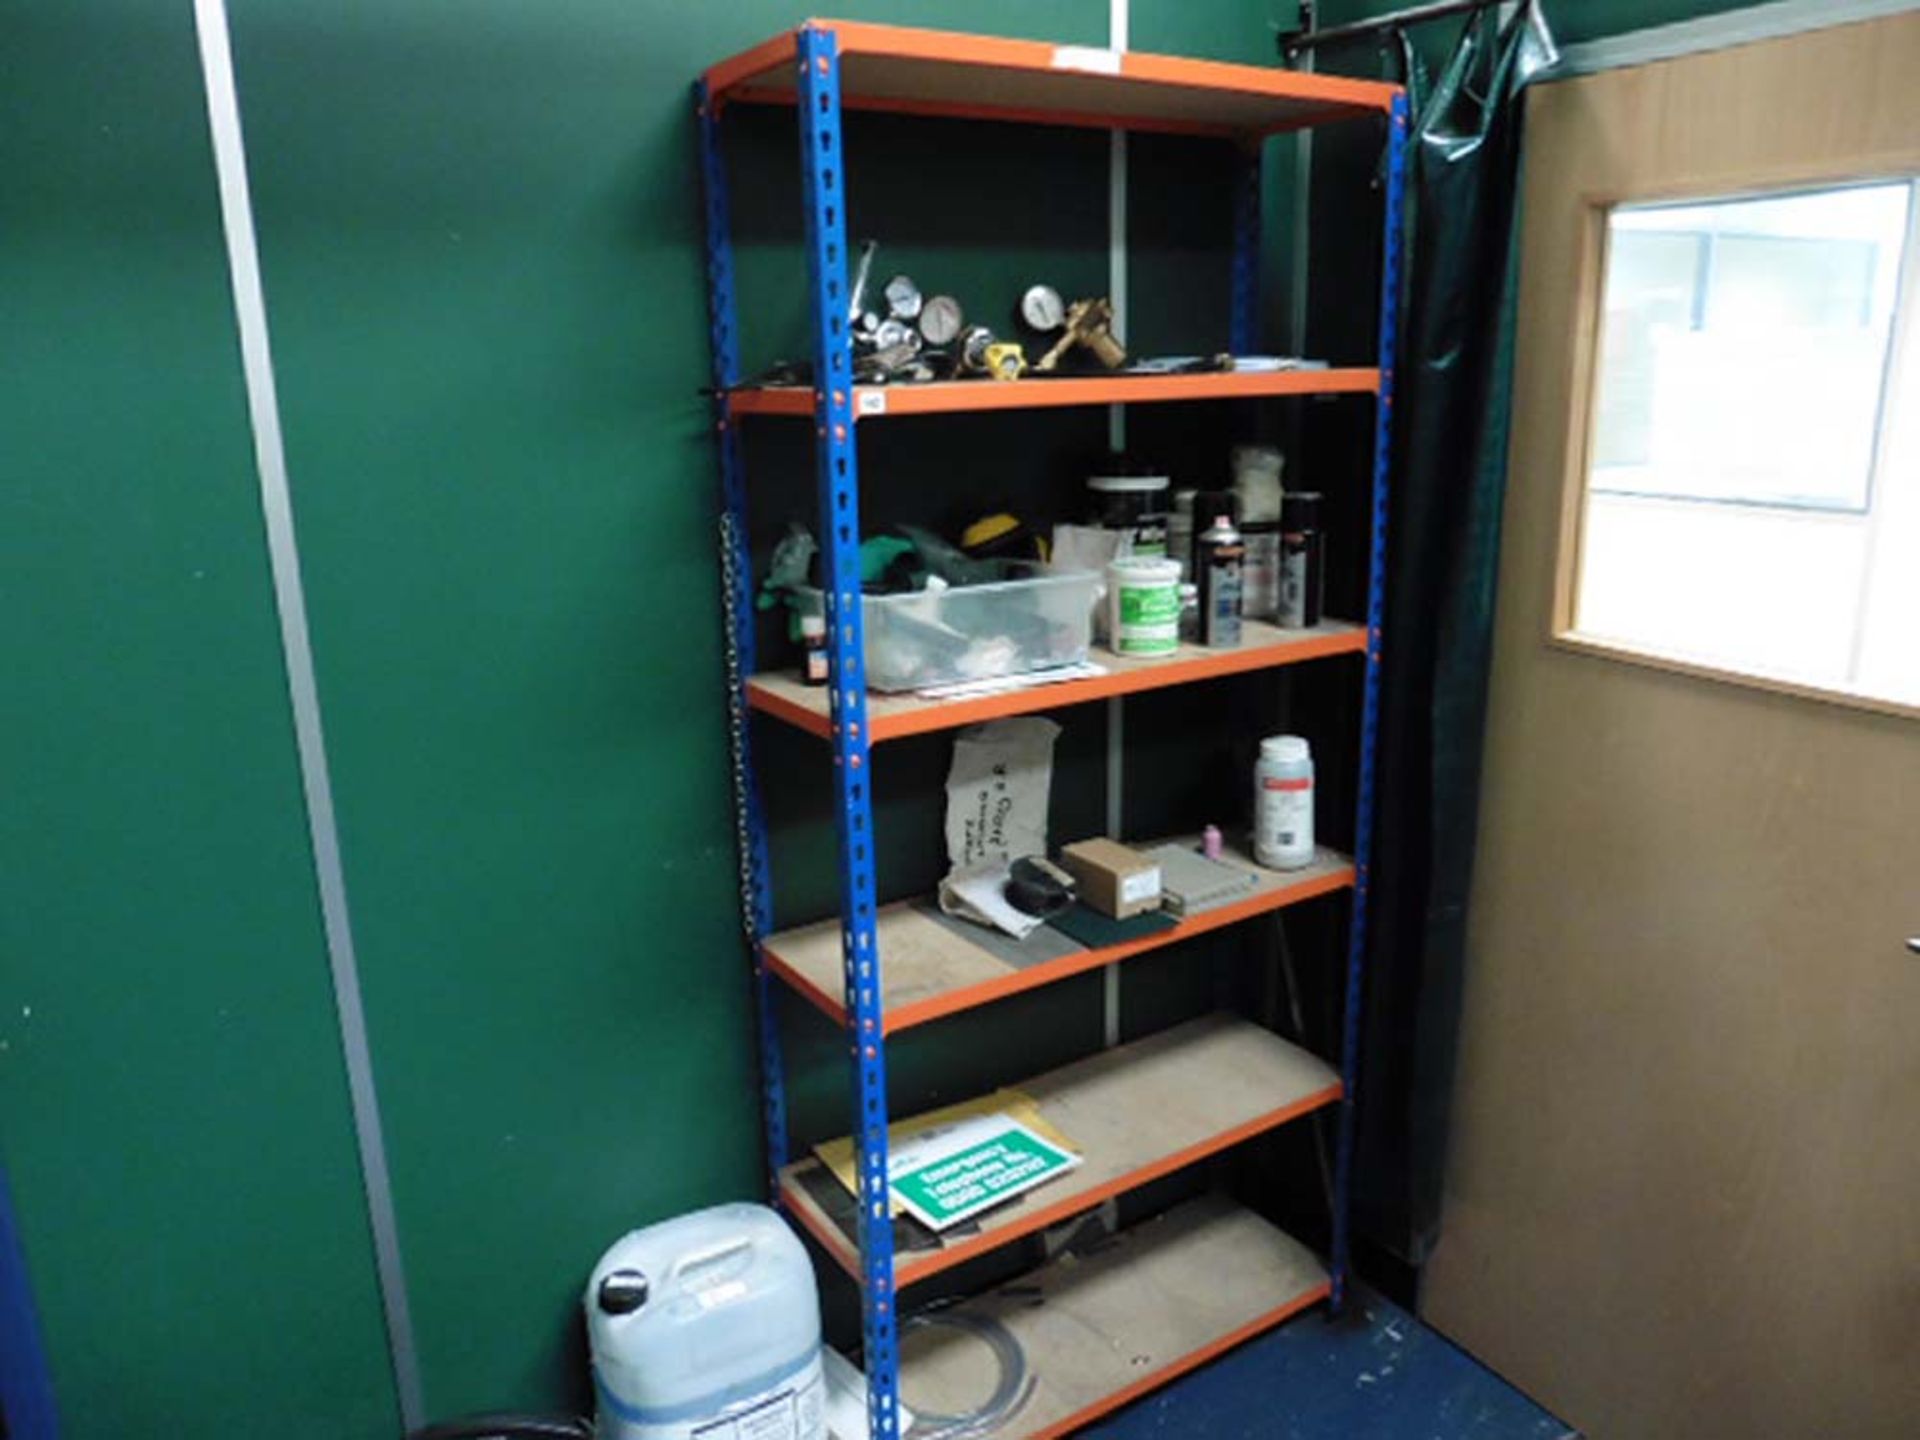 Blue & Orange shelf rack with contents of gas gauges and sundries